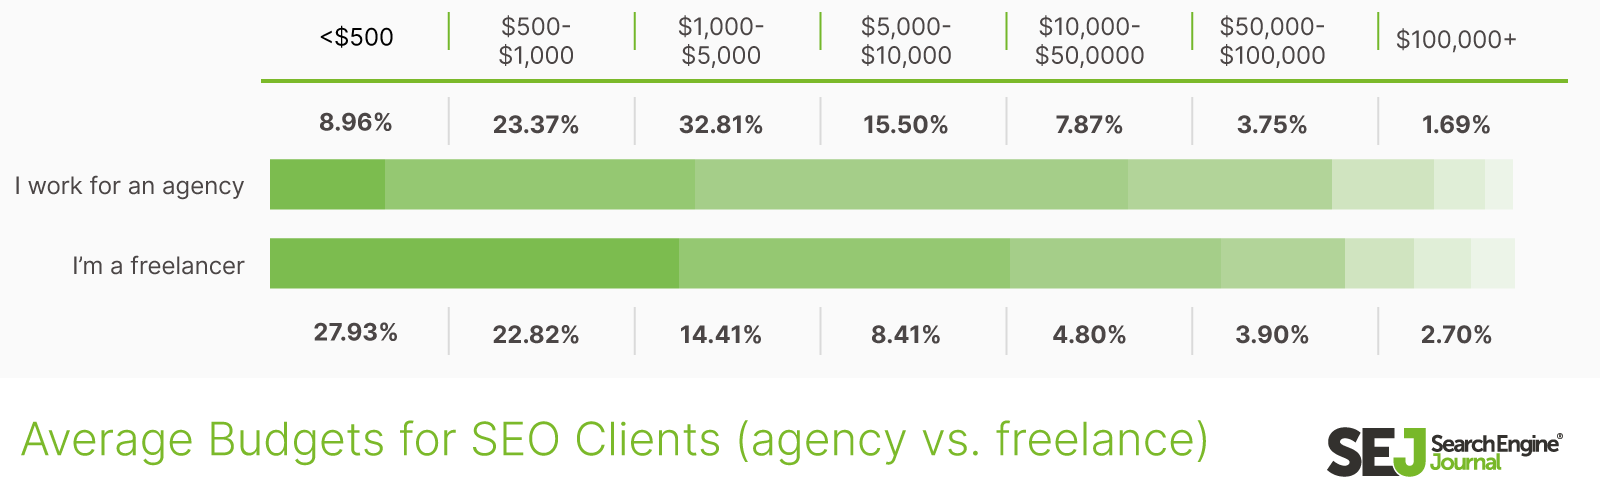 average budgets for SEO clients, agency vs. freelance